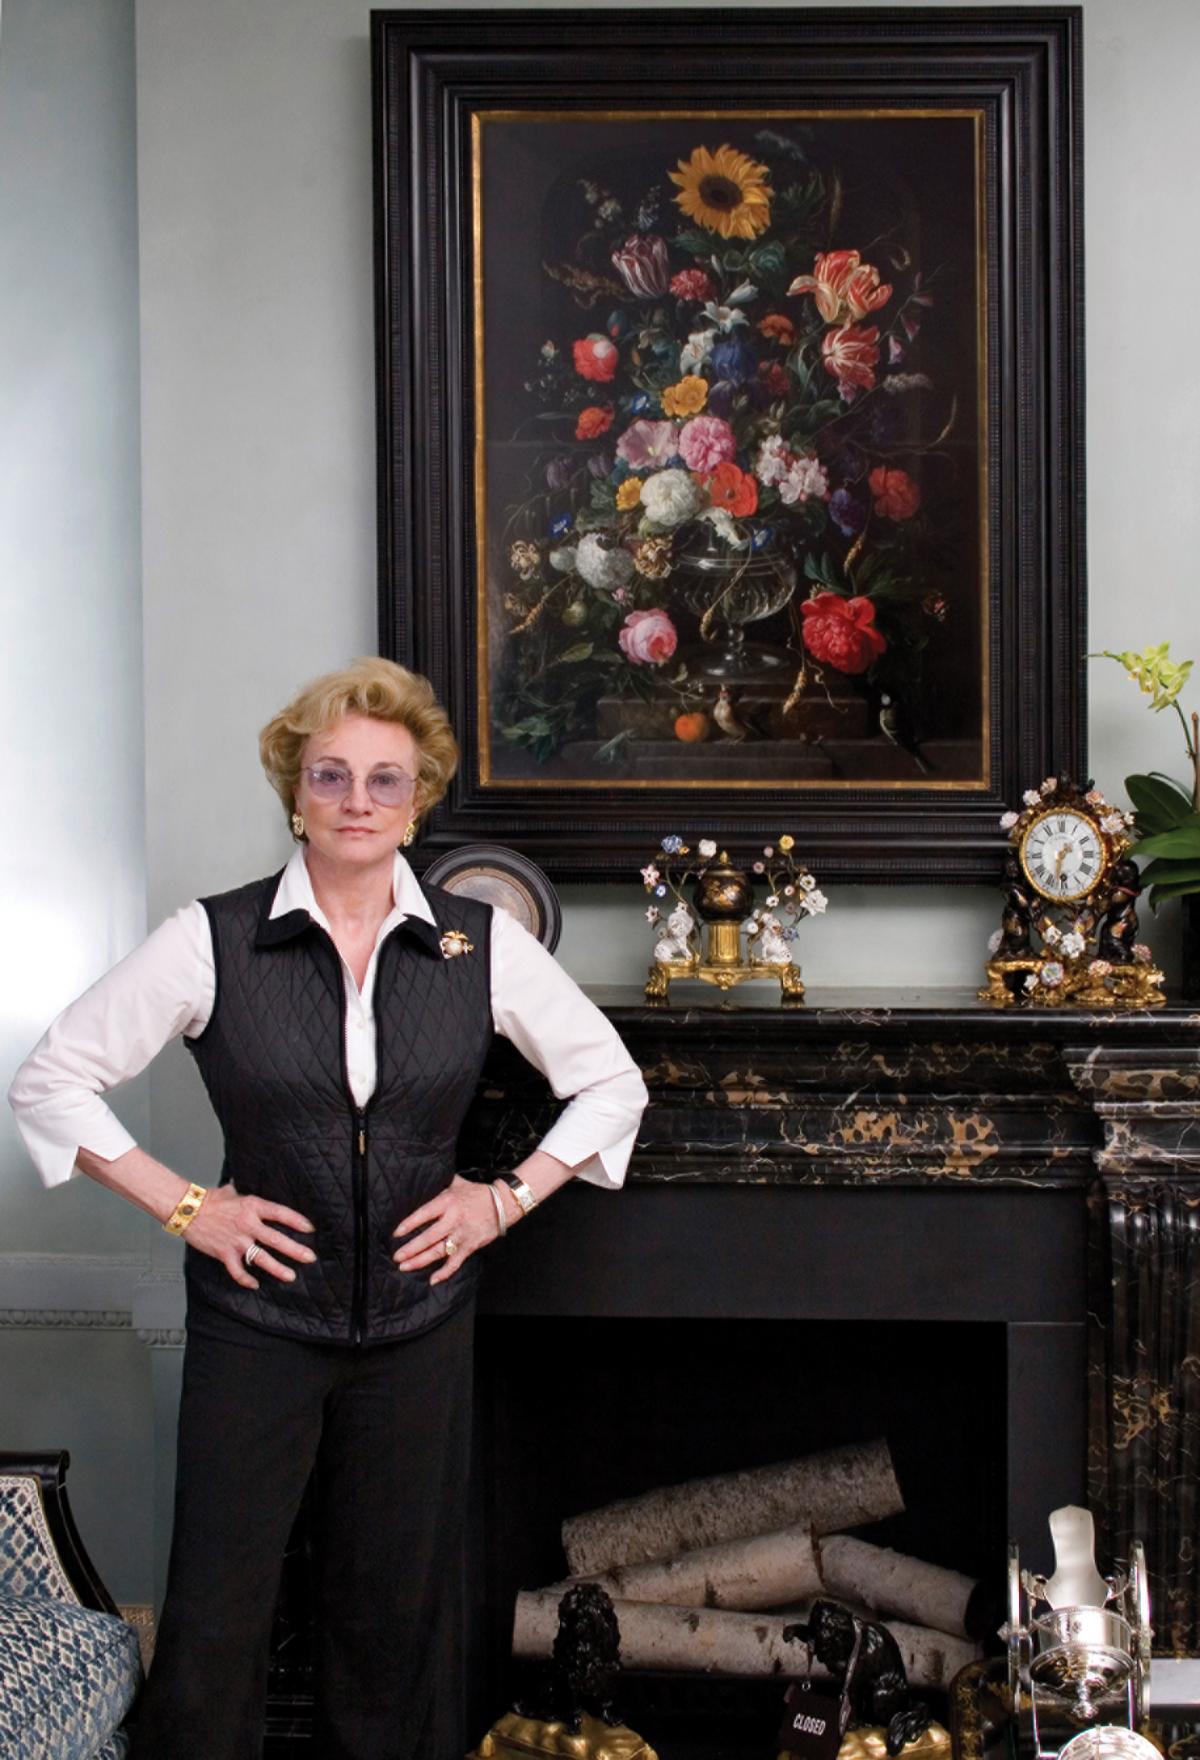 Photograph of a woman standing in front of a painting that hangs above a fireplace